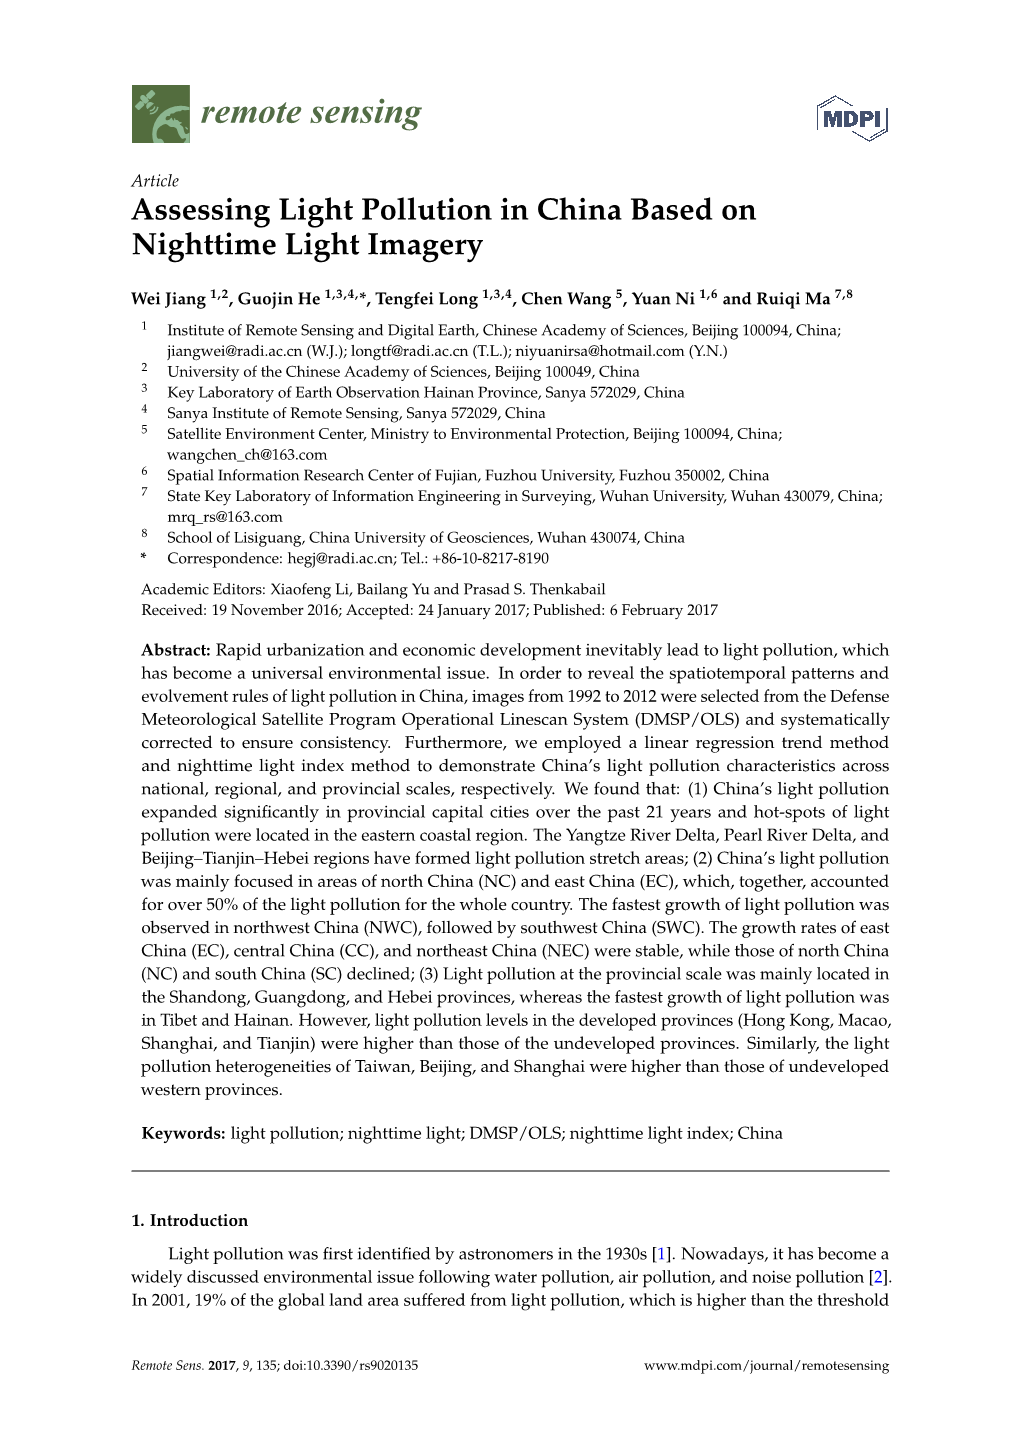 Assessing Light Pollution in China Based on Nighttime Light Imagery